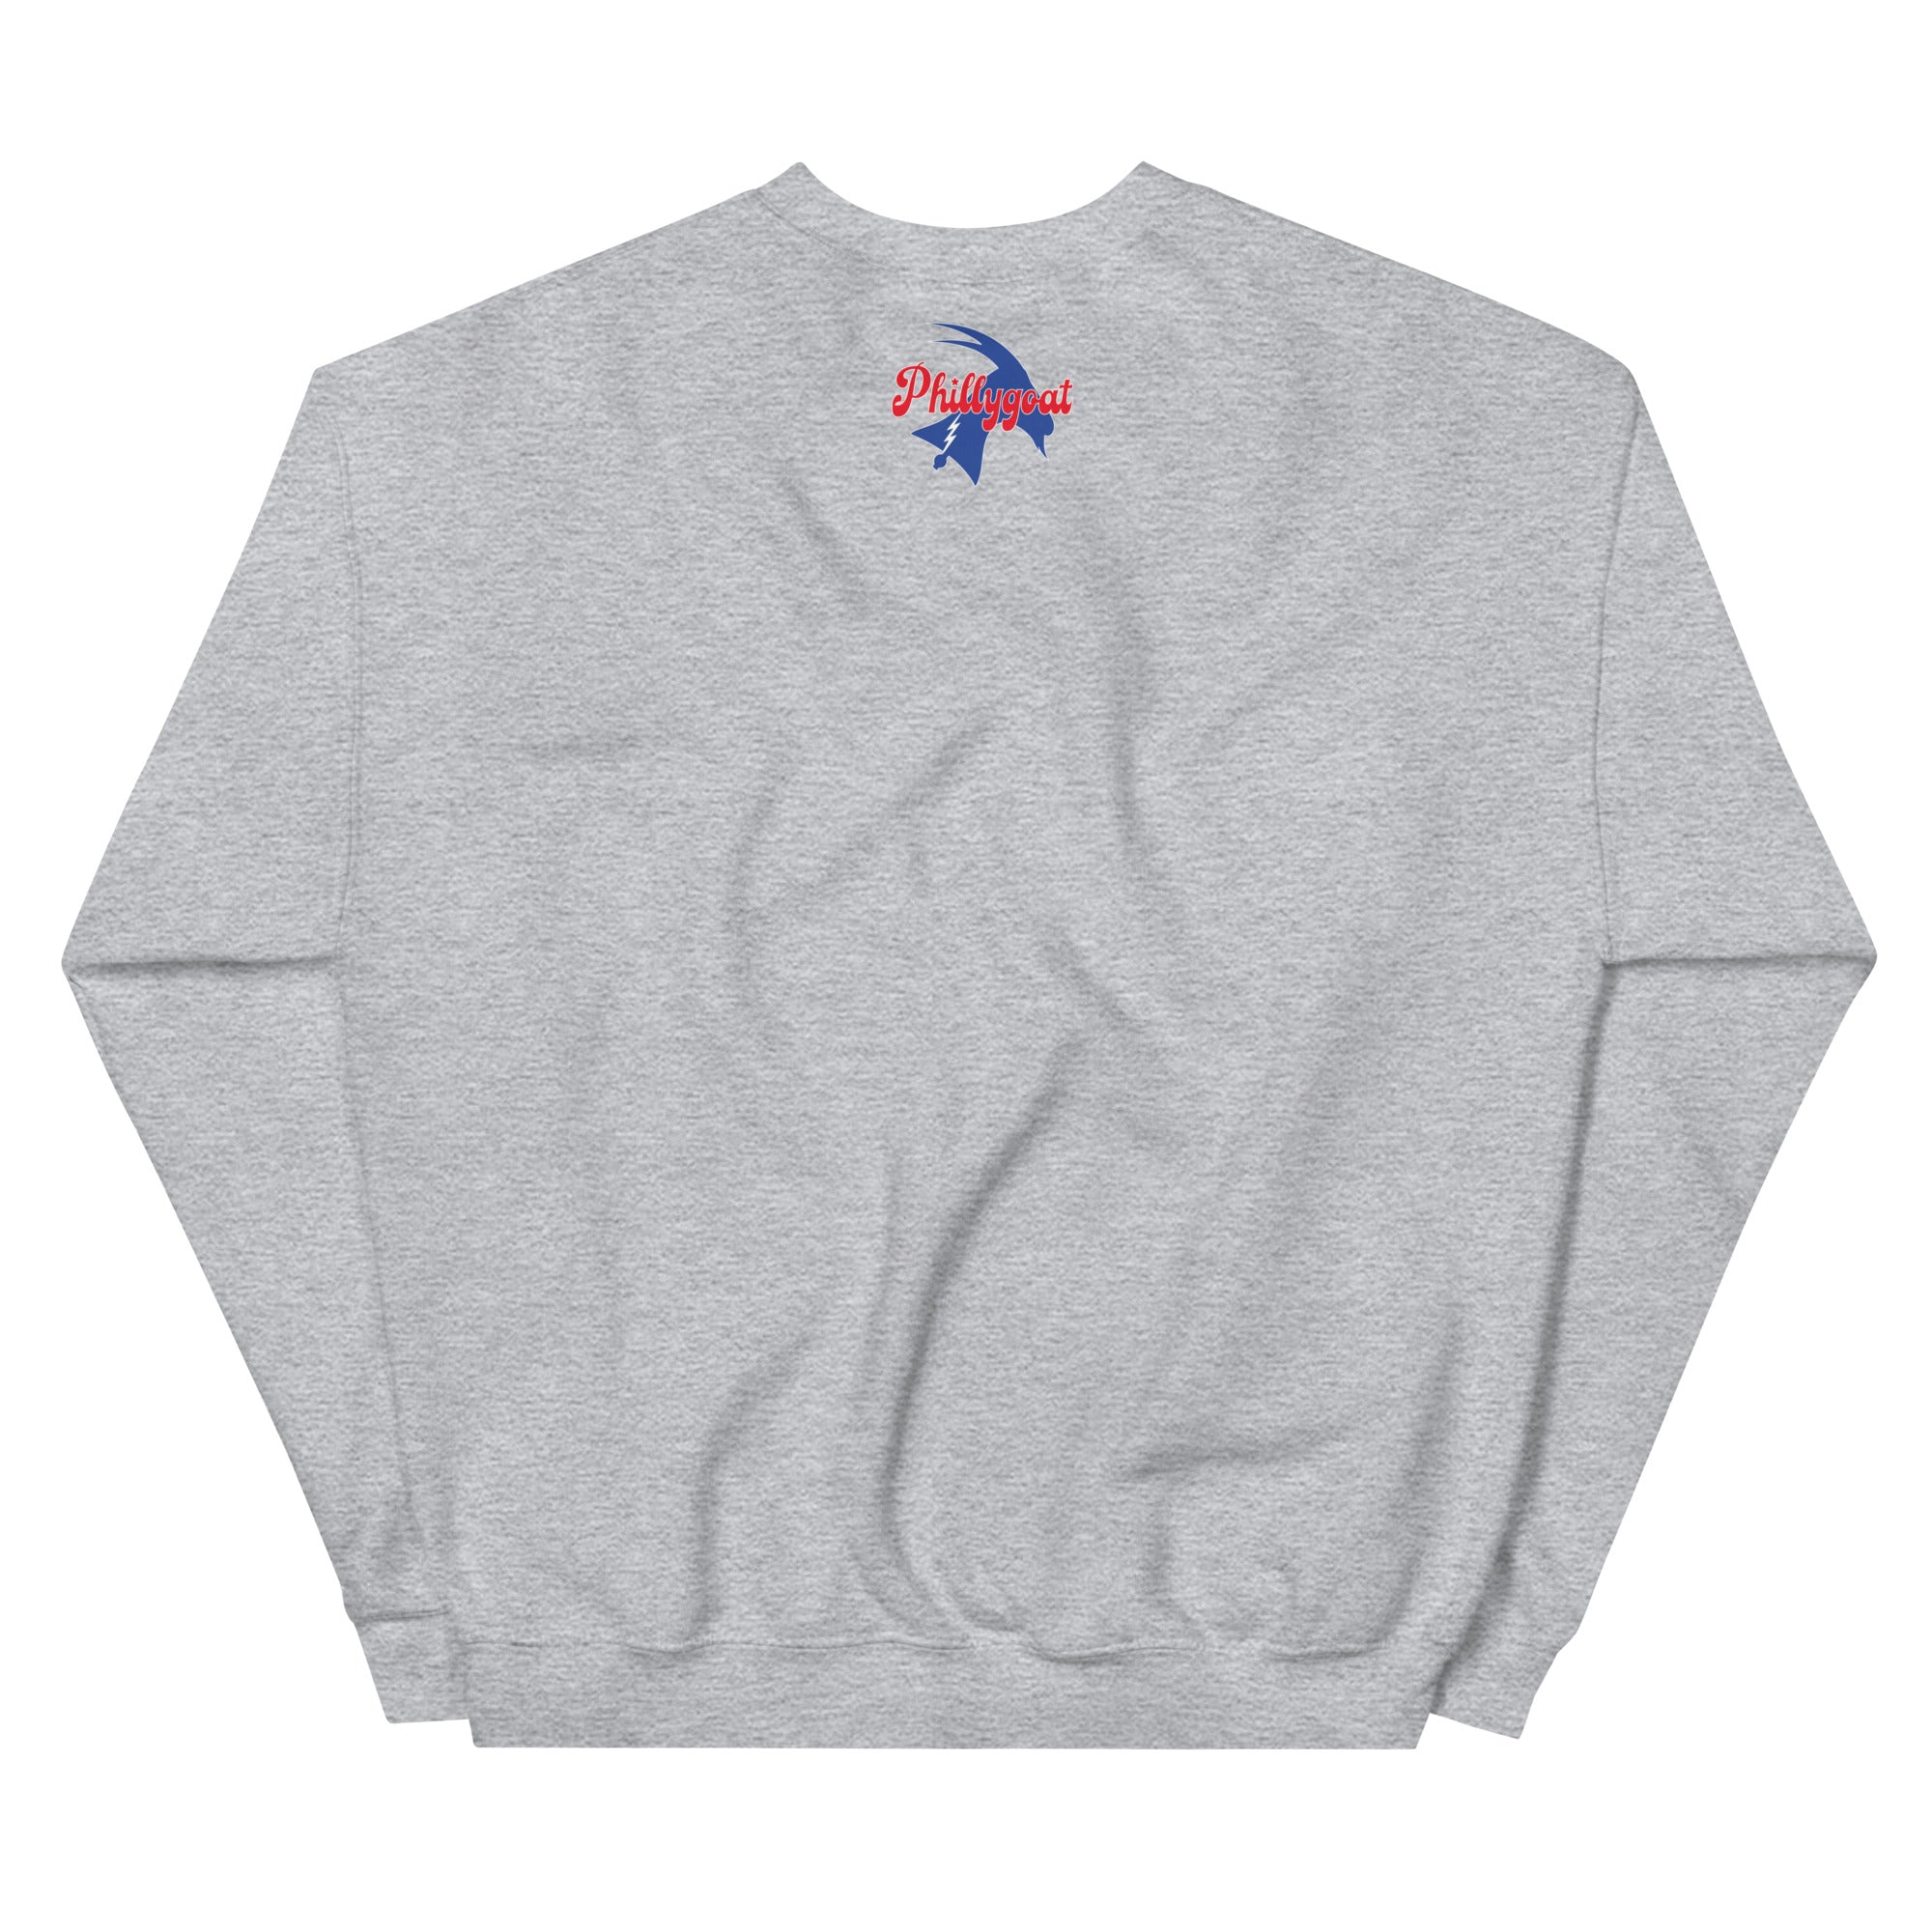 "Made in Philly" Sweatshirt